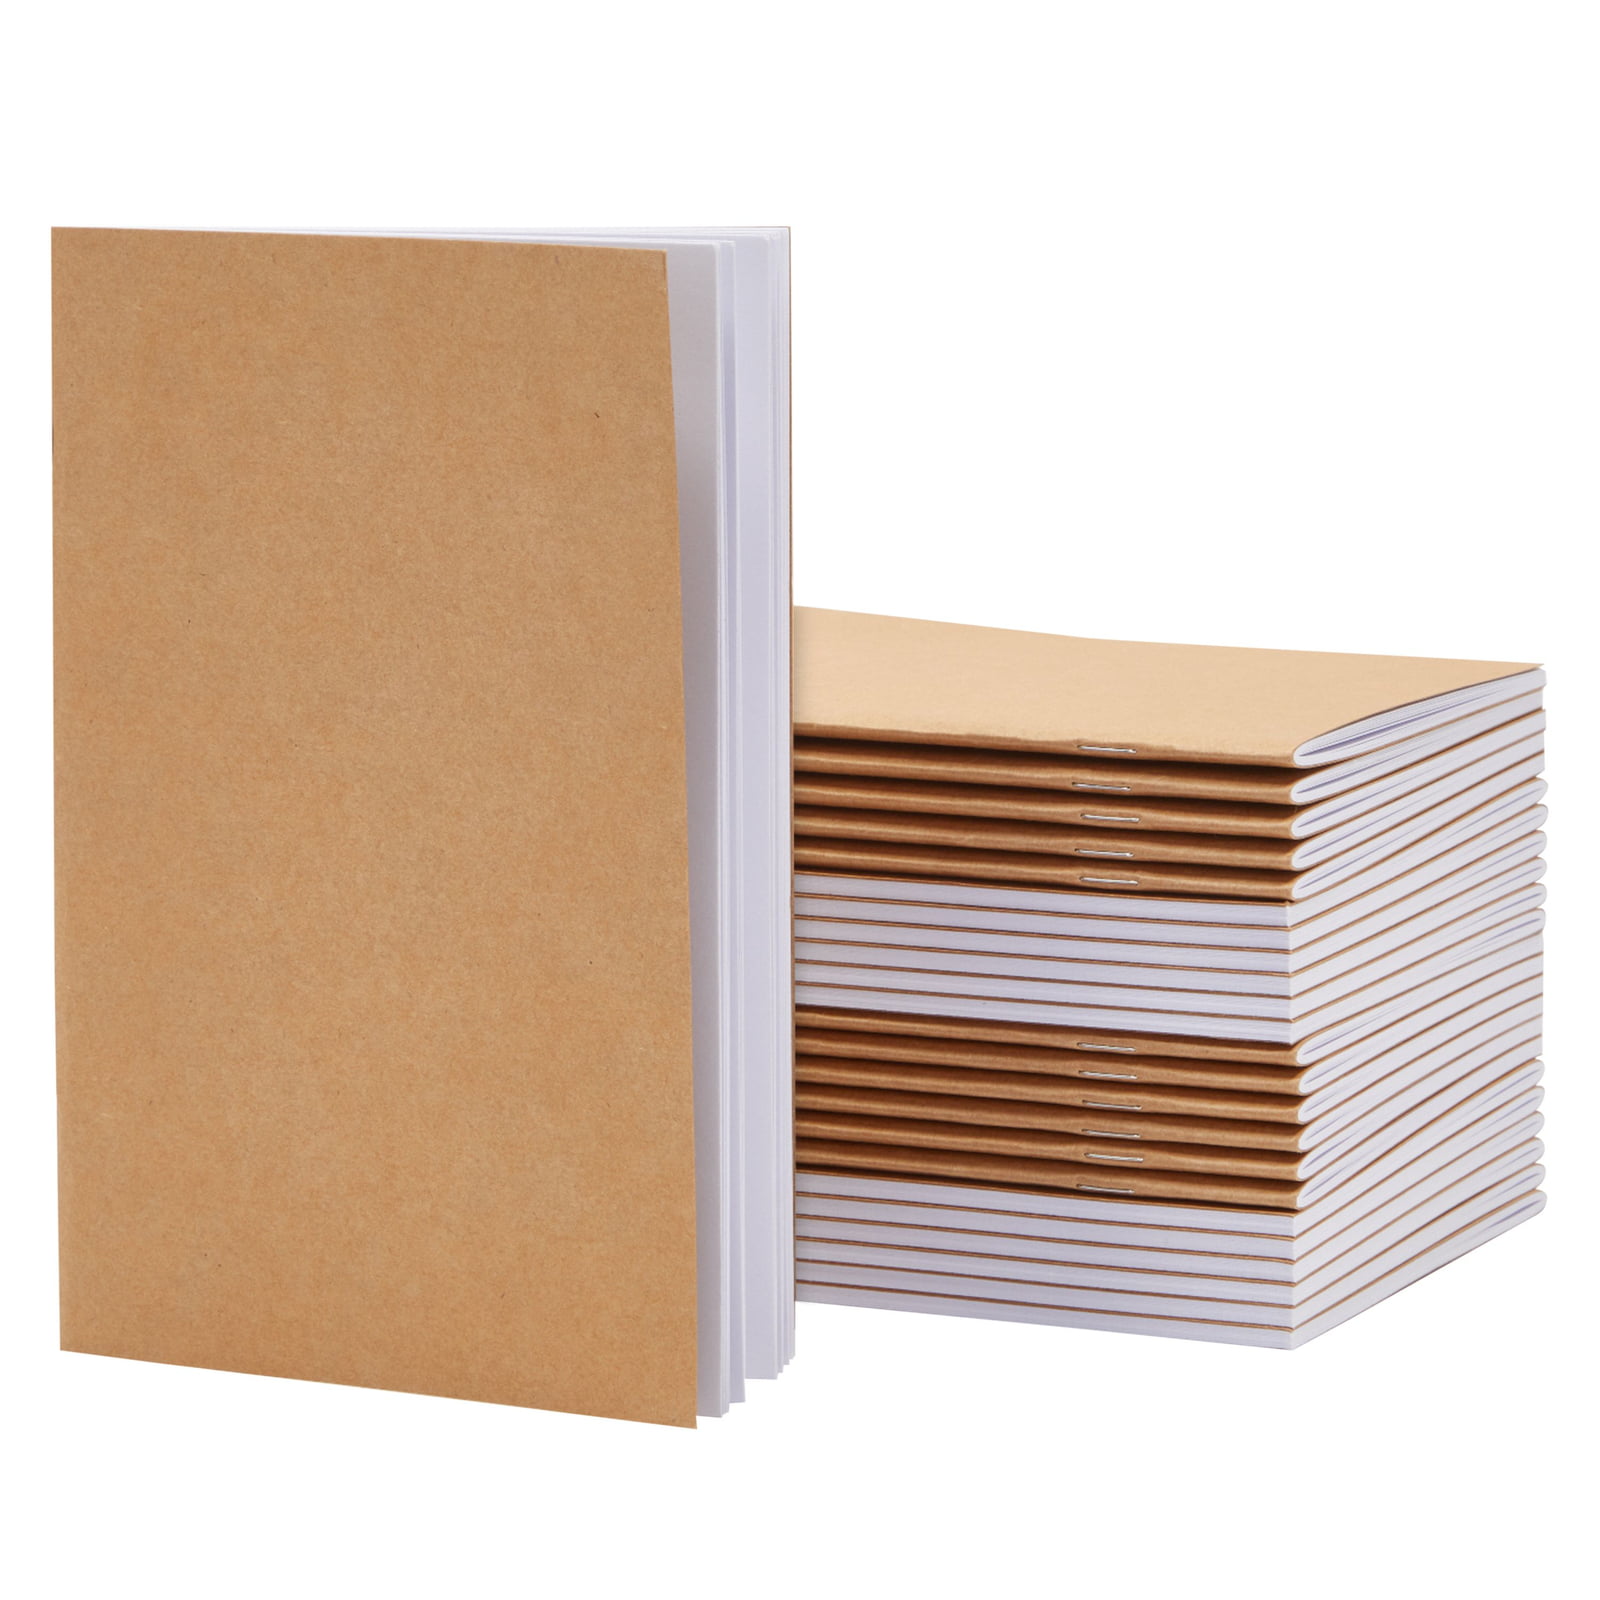 Top Wire Bound Notebooks- 5.5 x 8.5 Inches Promo Items- ASSORTED COVER COLORS AVAILABLE Blank Notebooks Journals Lined Notebooks Wholesale notebooks 50 PACK Bulk Steno Bulk Journals Notebooks 